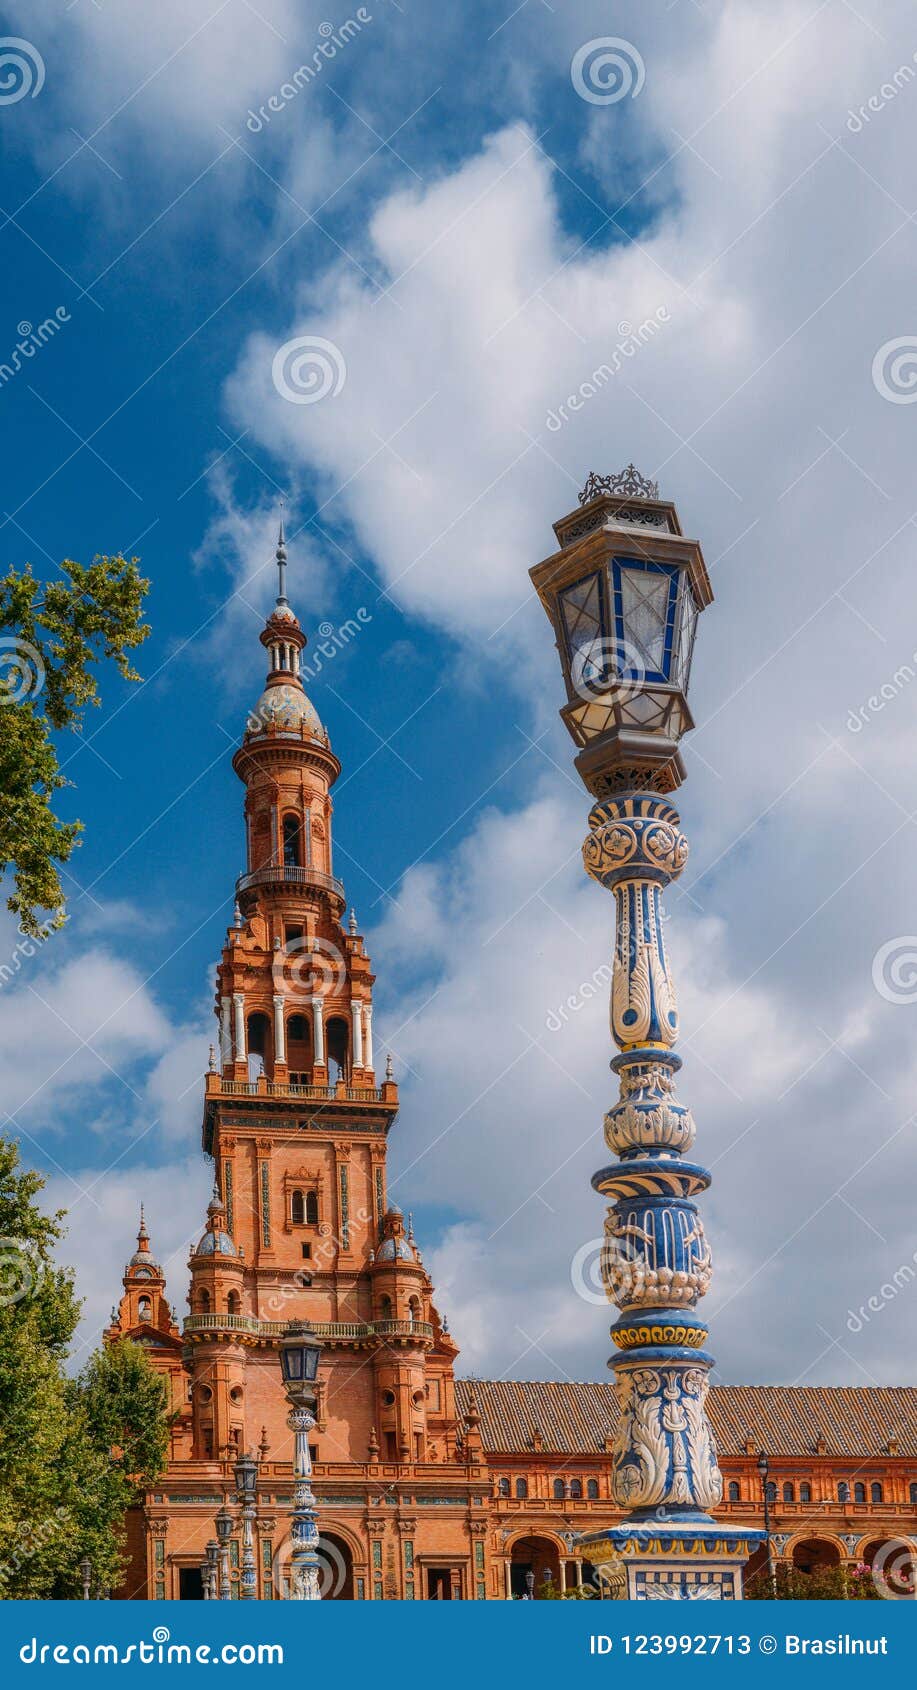 juxtaposition of blue and white ceramic azulejo tiles against one of the baroque sandstone tower at plaza de espana in seville, sp